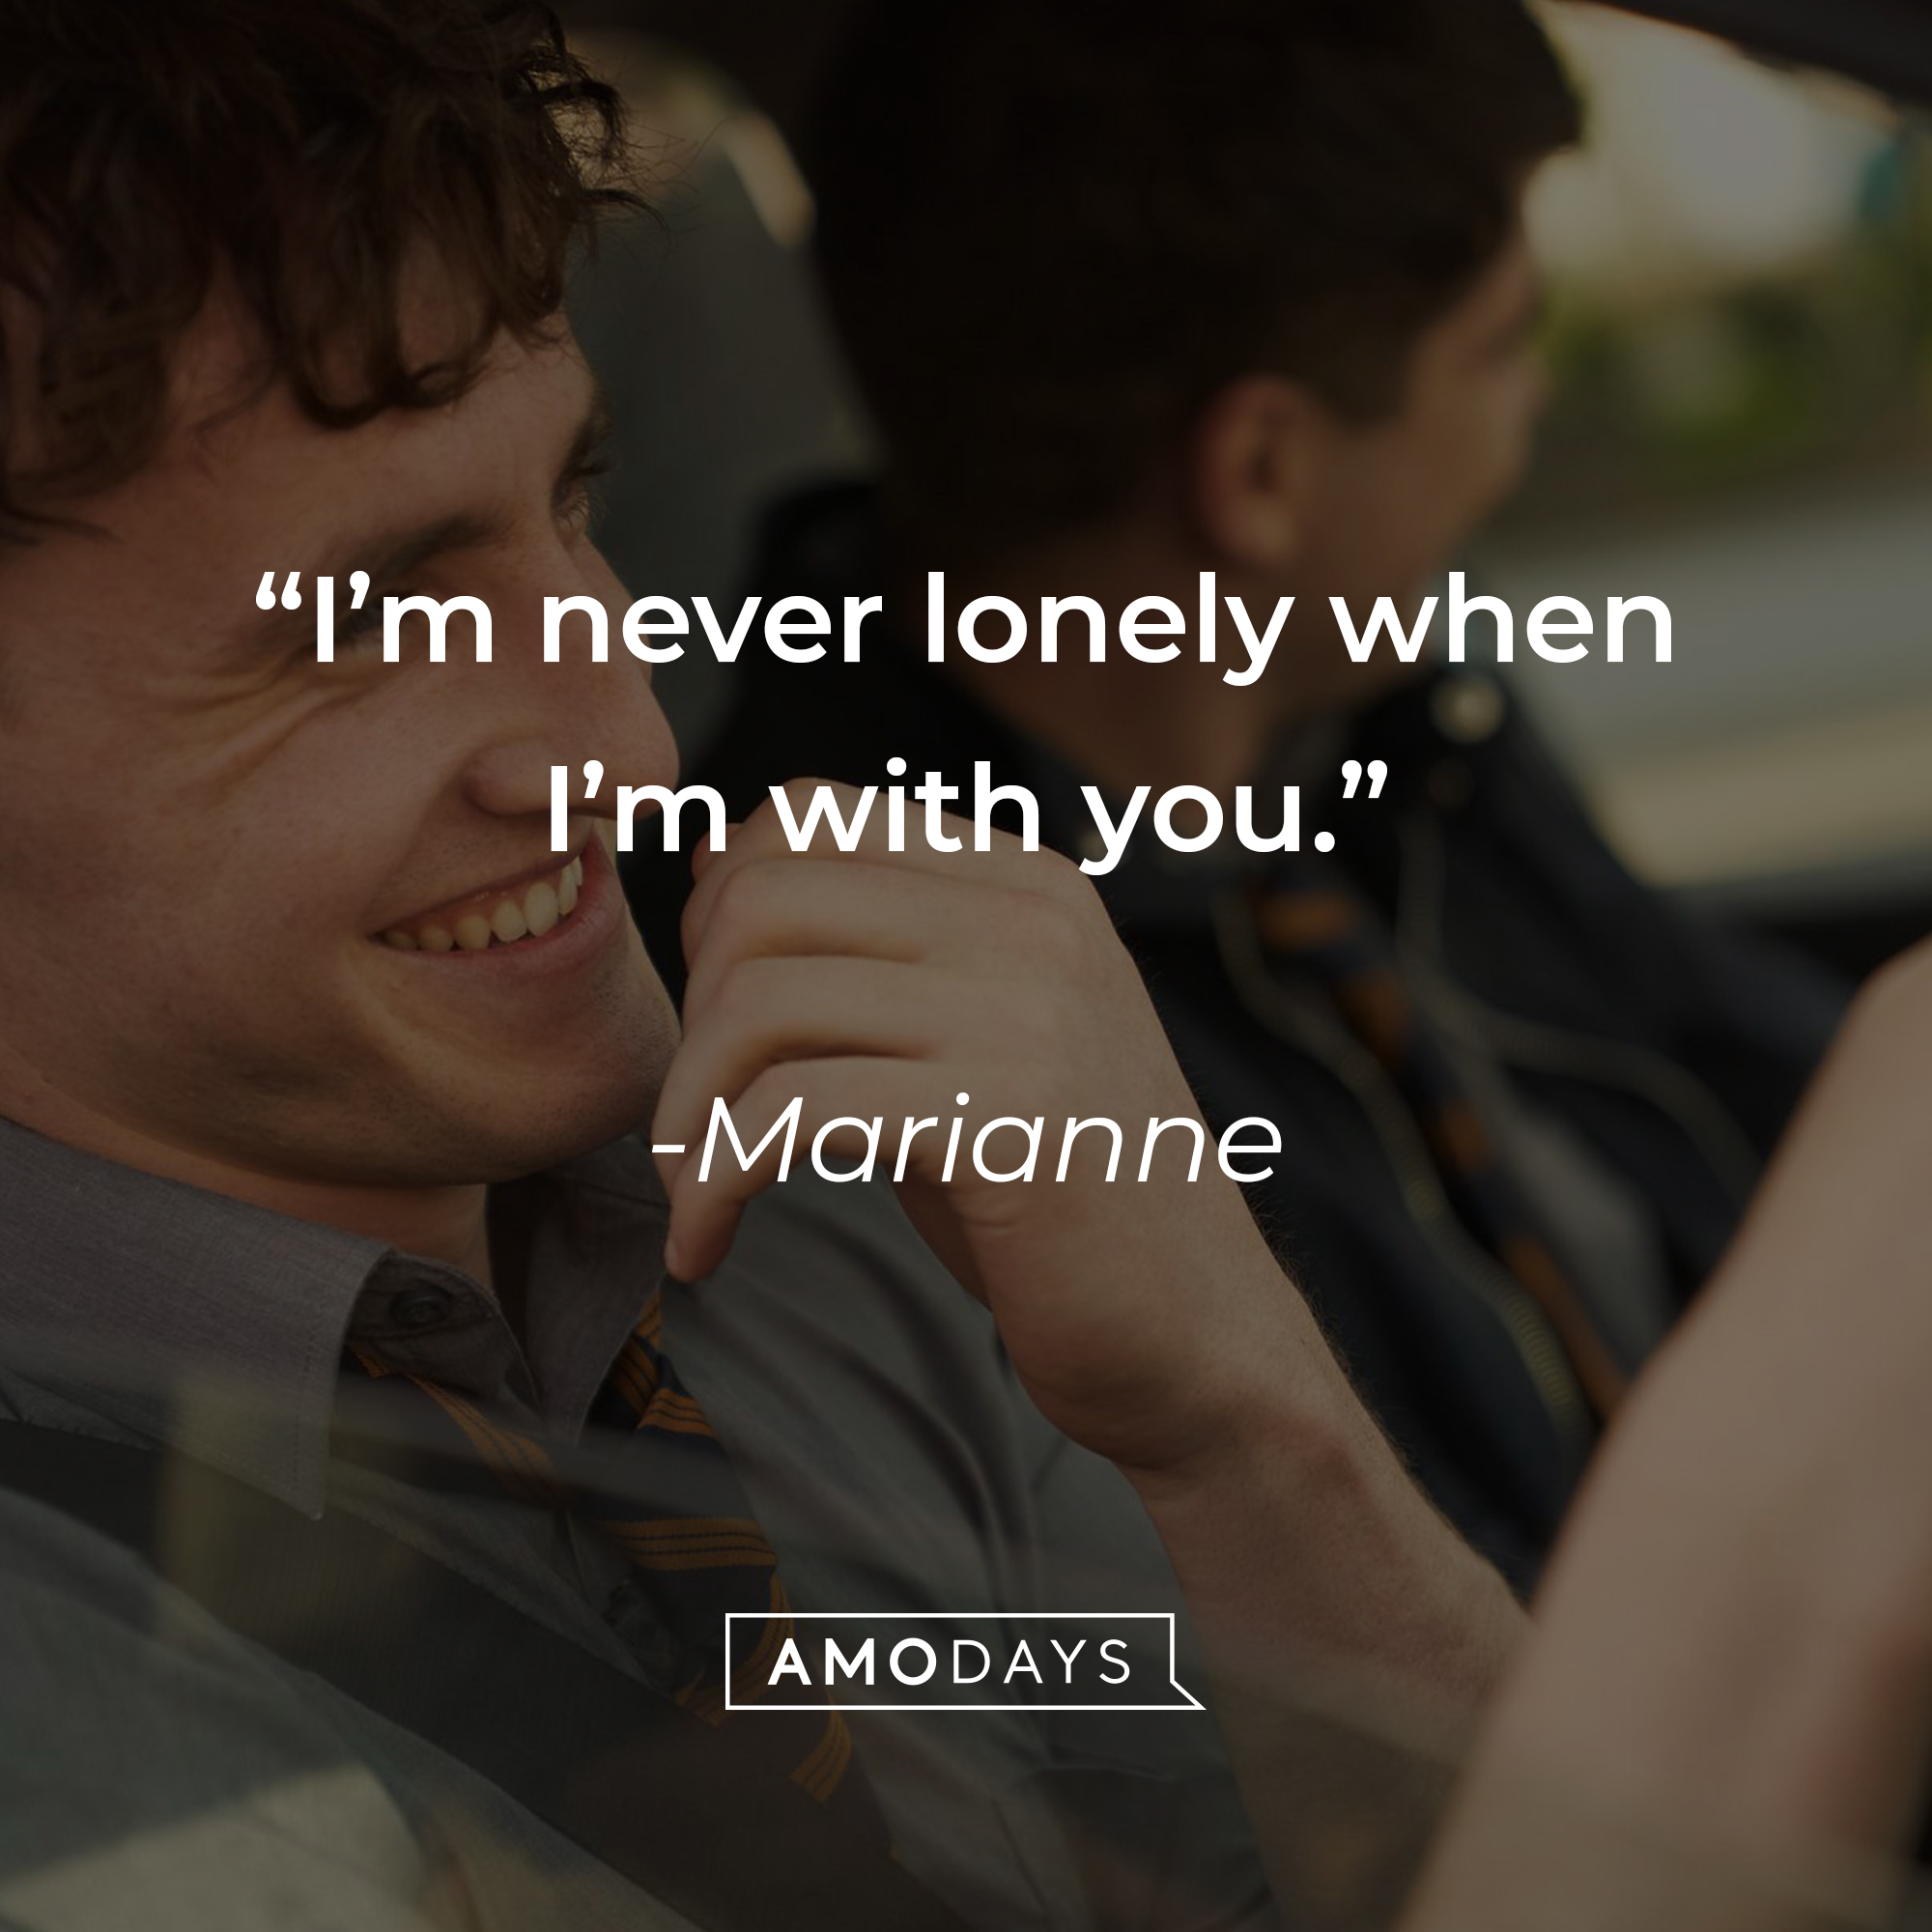 Connell, with Marianne’s quote: “I’m never lonely when I’m with you.” | Source: facebook.com/normalpeoplebbc